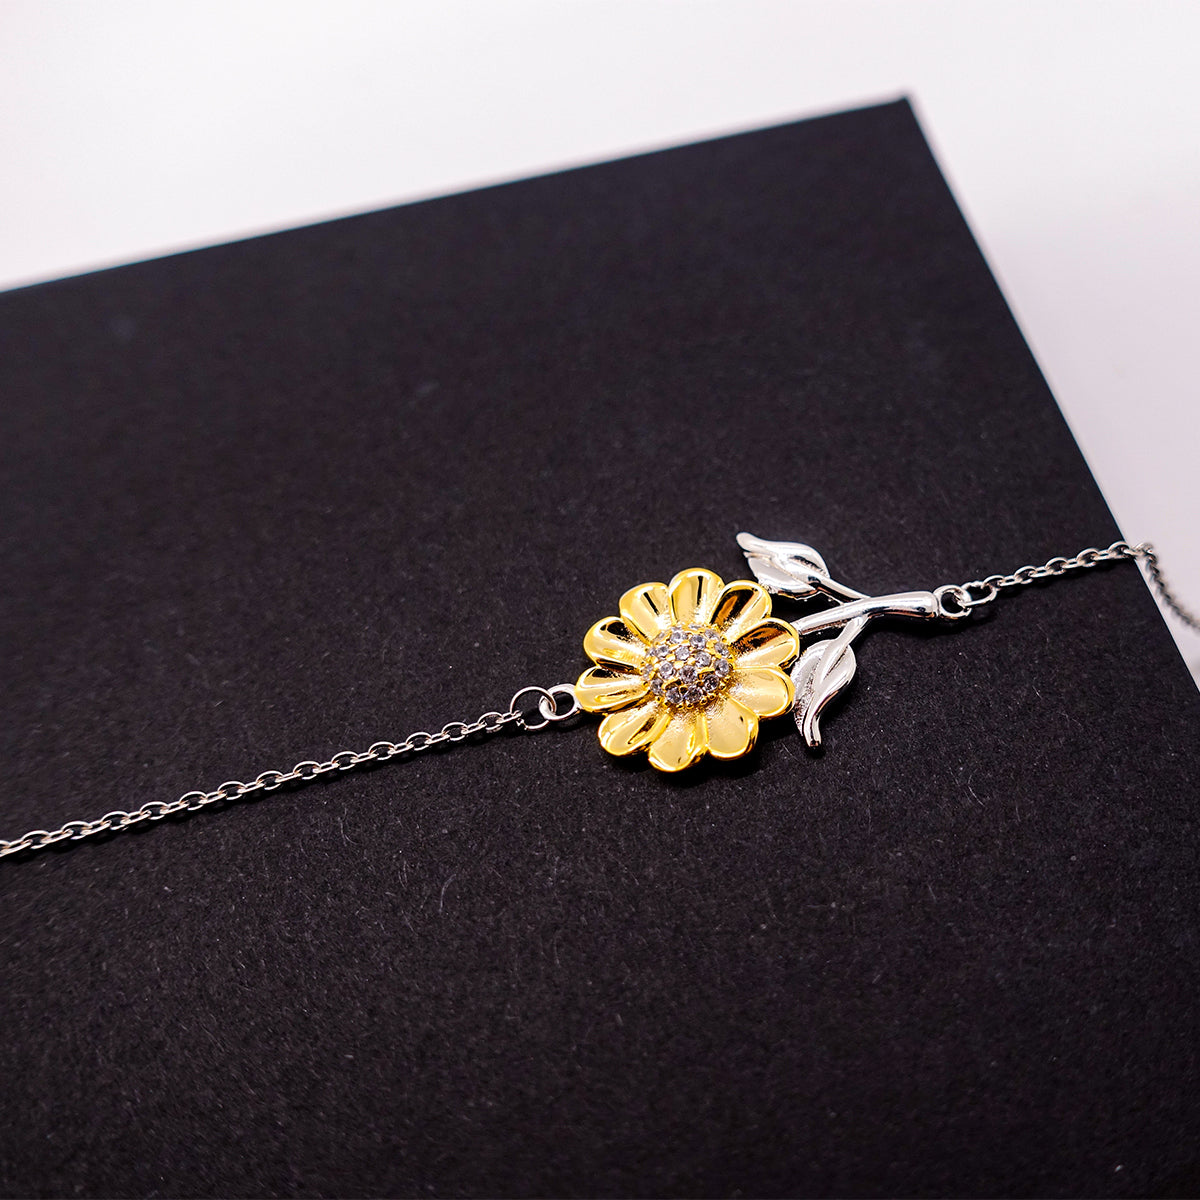 Grandmom Sunflower Bracelet - Engraved Gift for Birthday, Christmas, and Holidays - Special Place in My Heart - Unique Jewelry for Grandmother